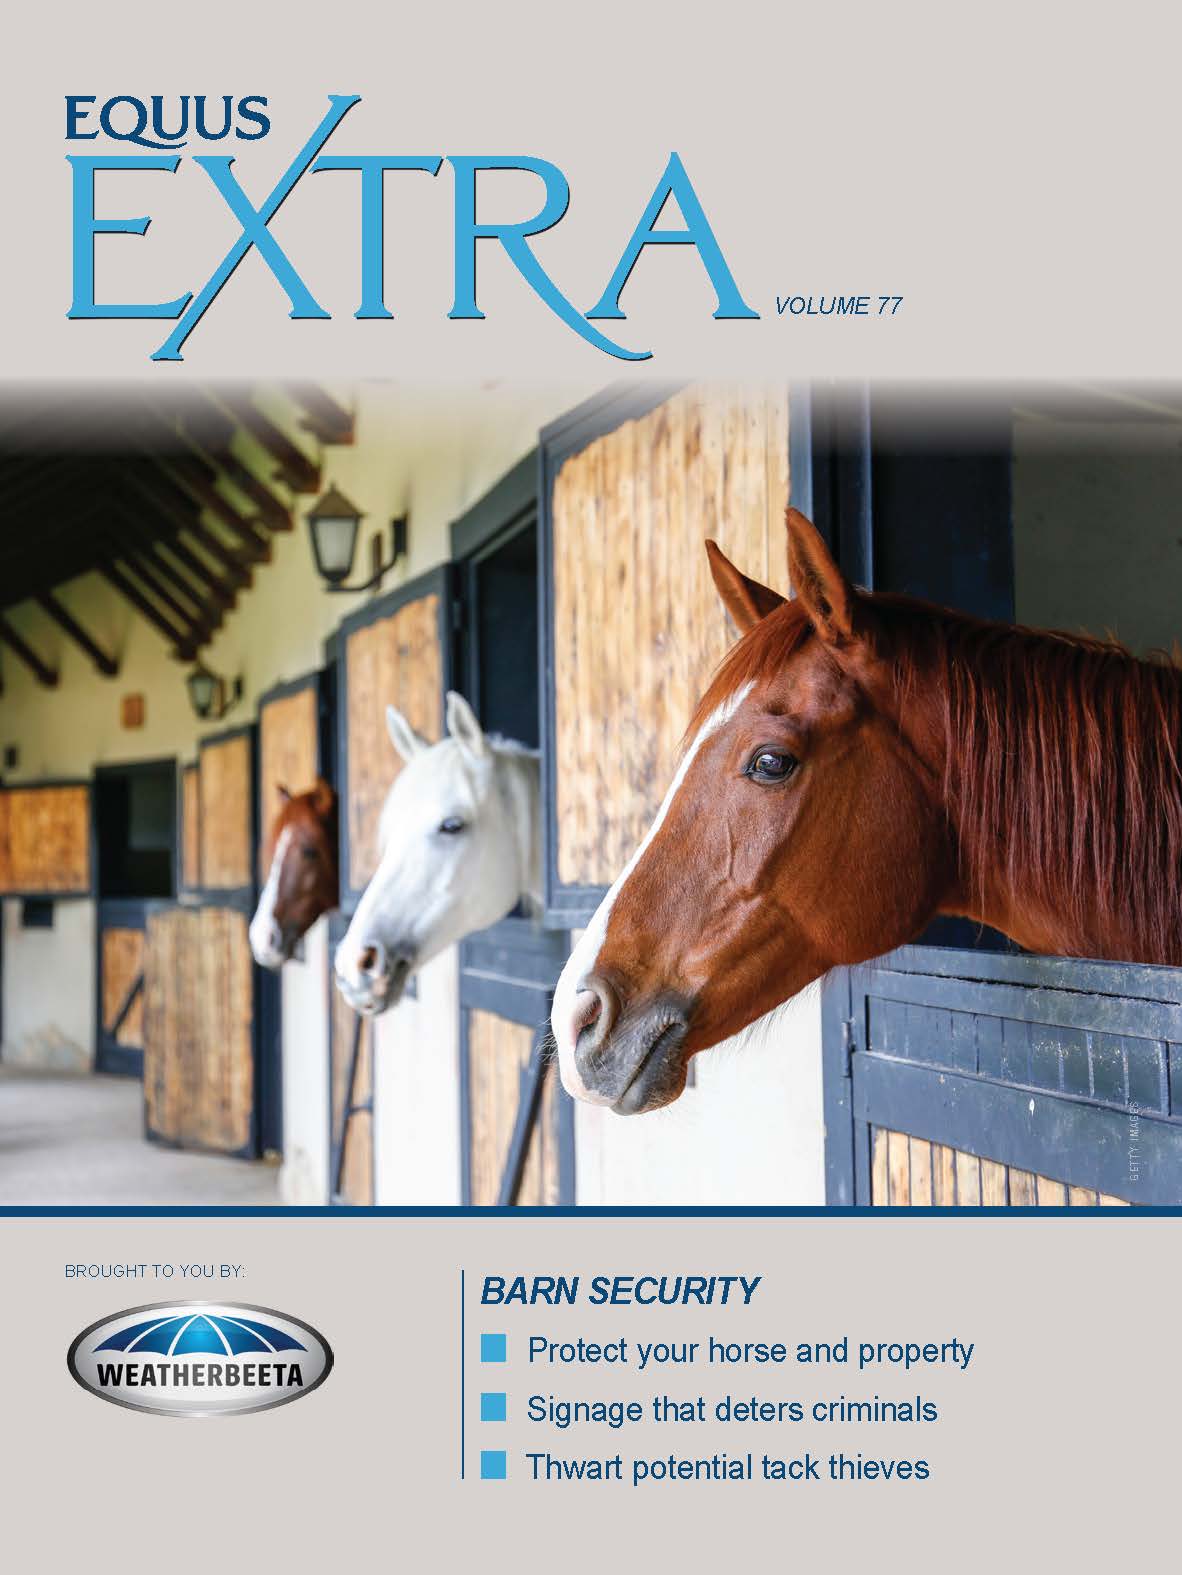 Keep your barn and property secure